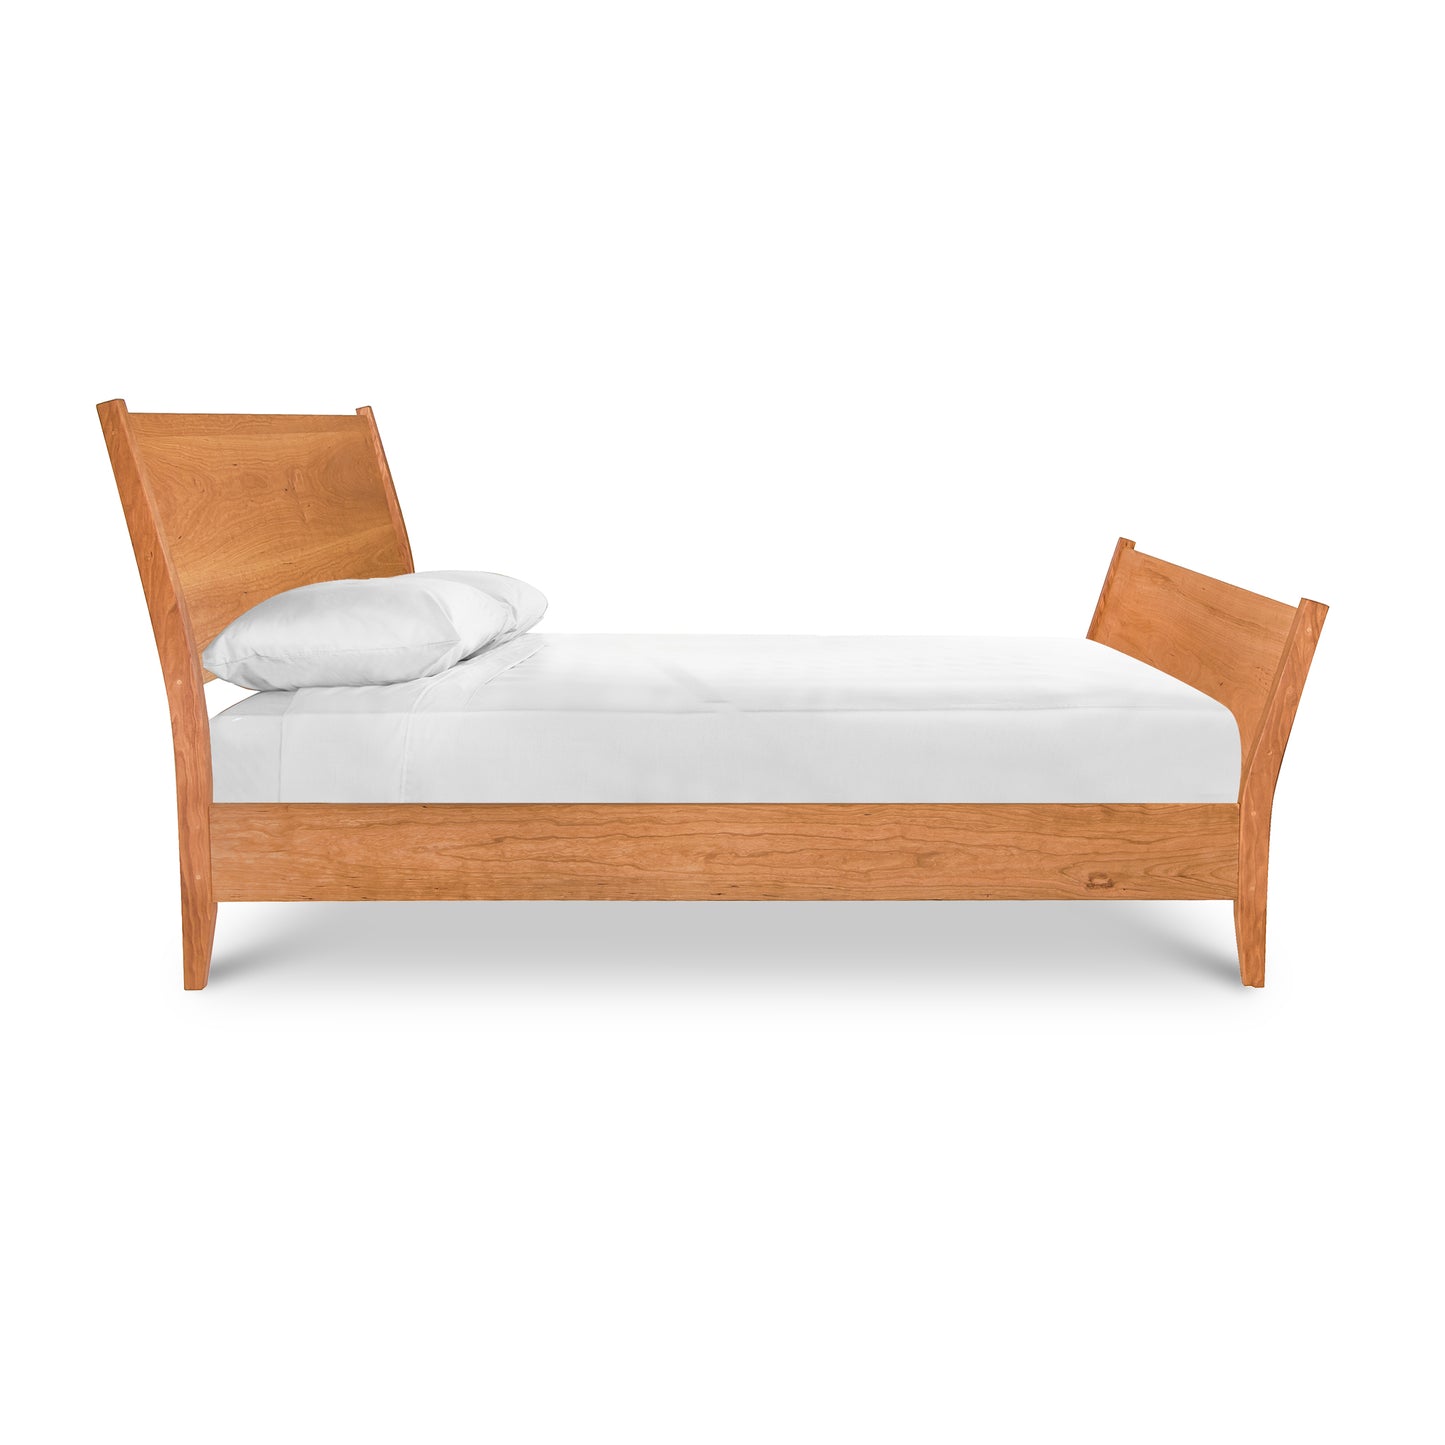 An Maple Corner Woodworks Andover Modern Incline Sleigh Bed with a curved headboard and footboard, featuring a single white pillow on a white mattress, isolated against a white background.